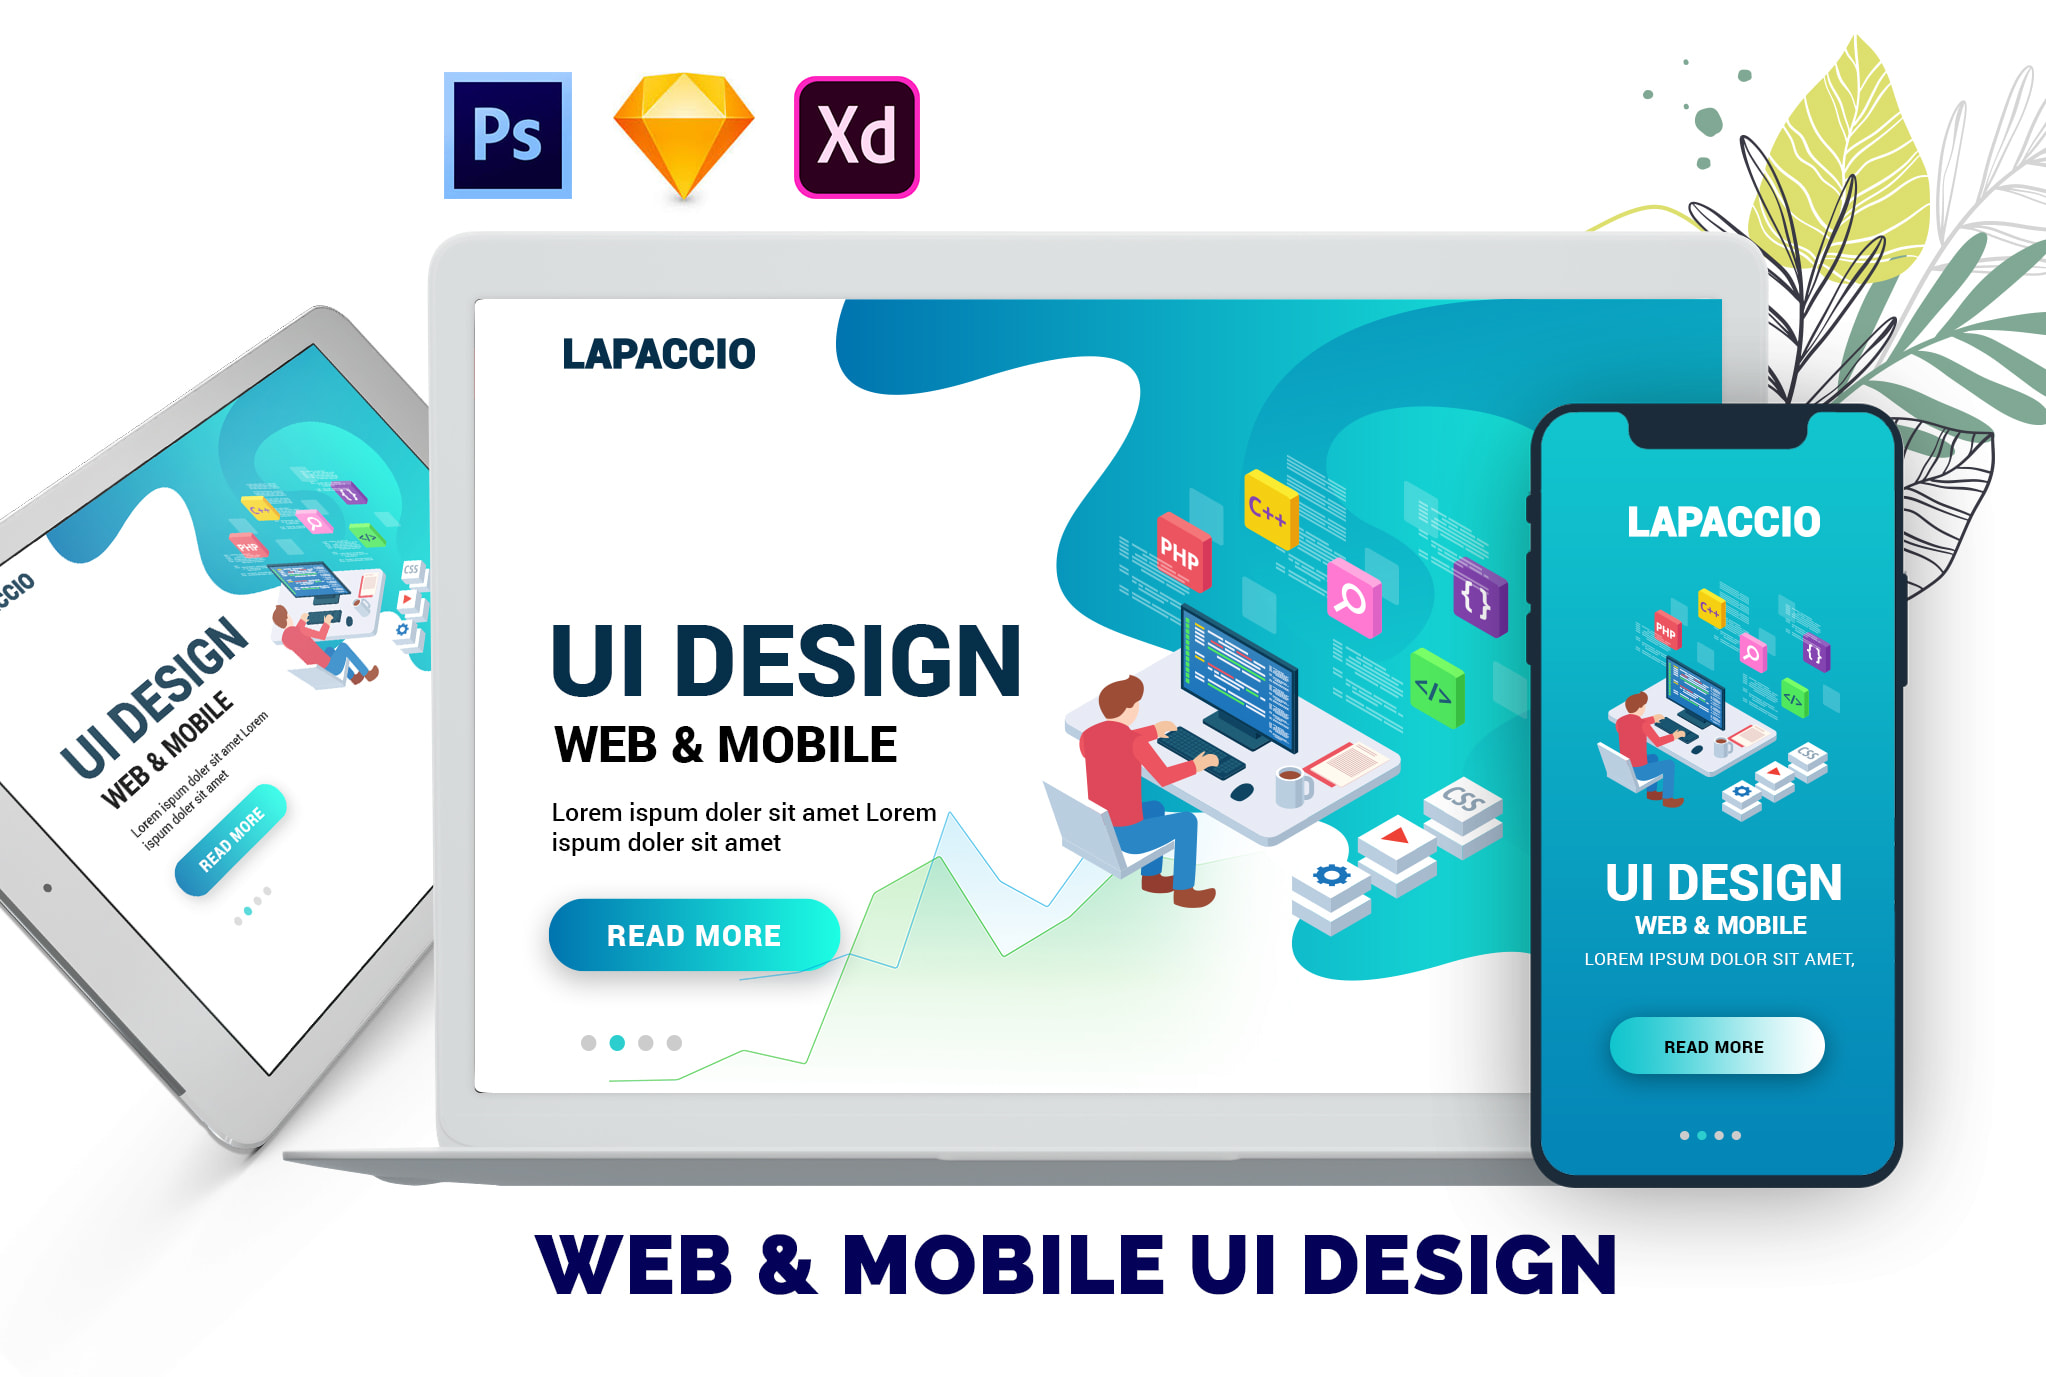 Download Design Awesome Website Psd Template By Lapaccio PSD Mockup Templates